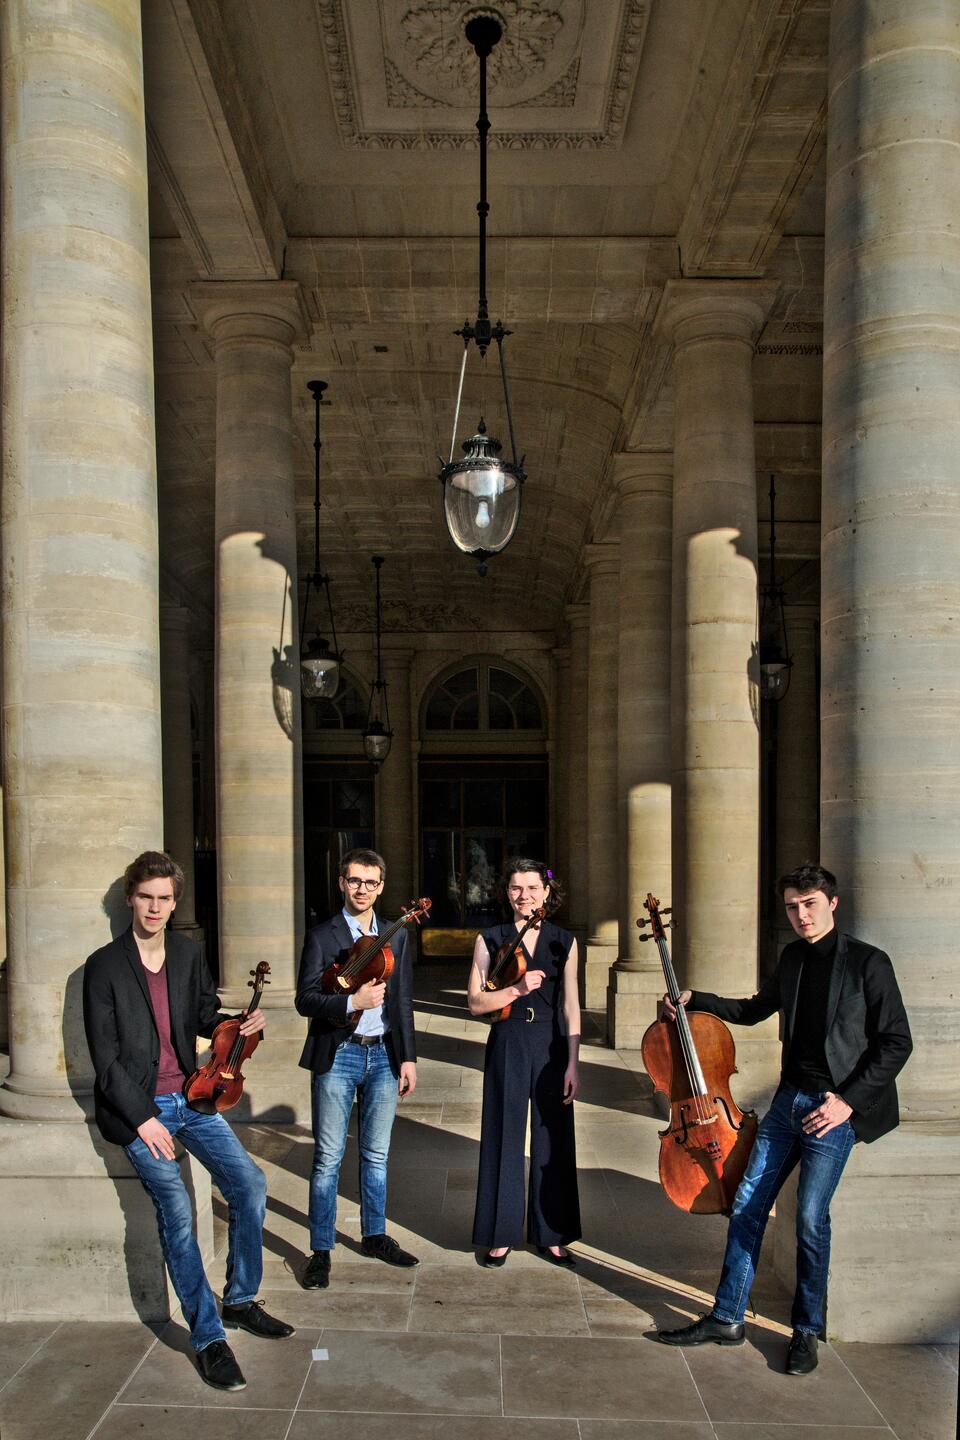 The quartet is settled between the Palais Royal's majestic columns